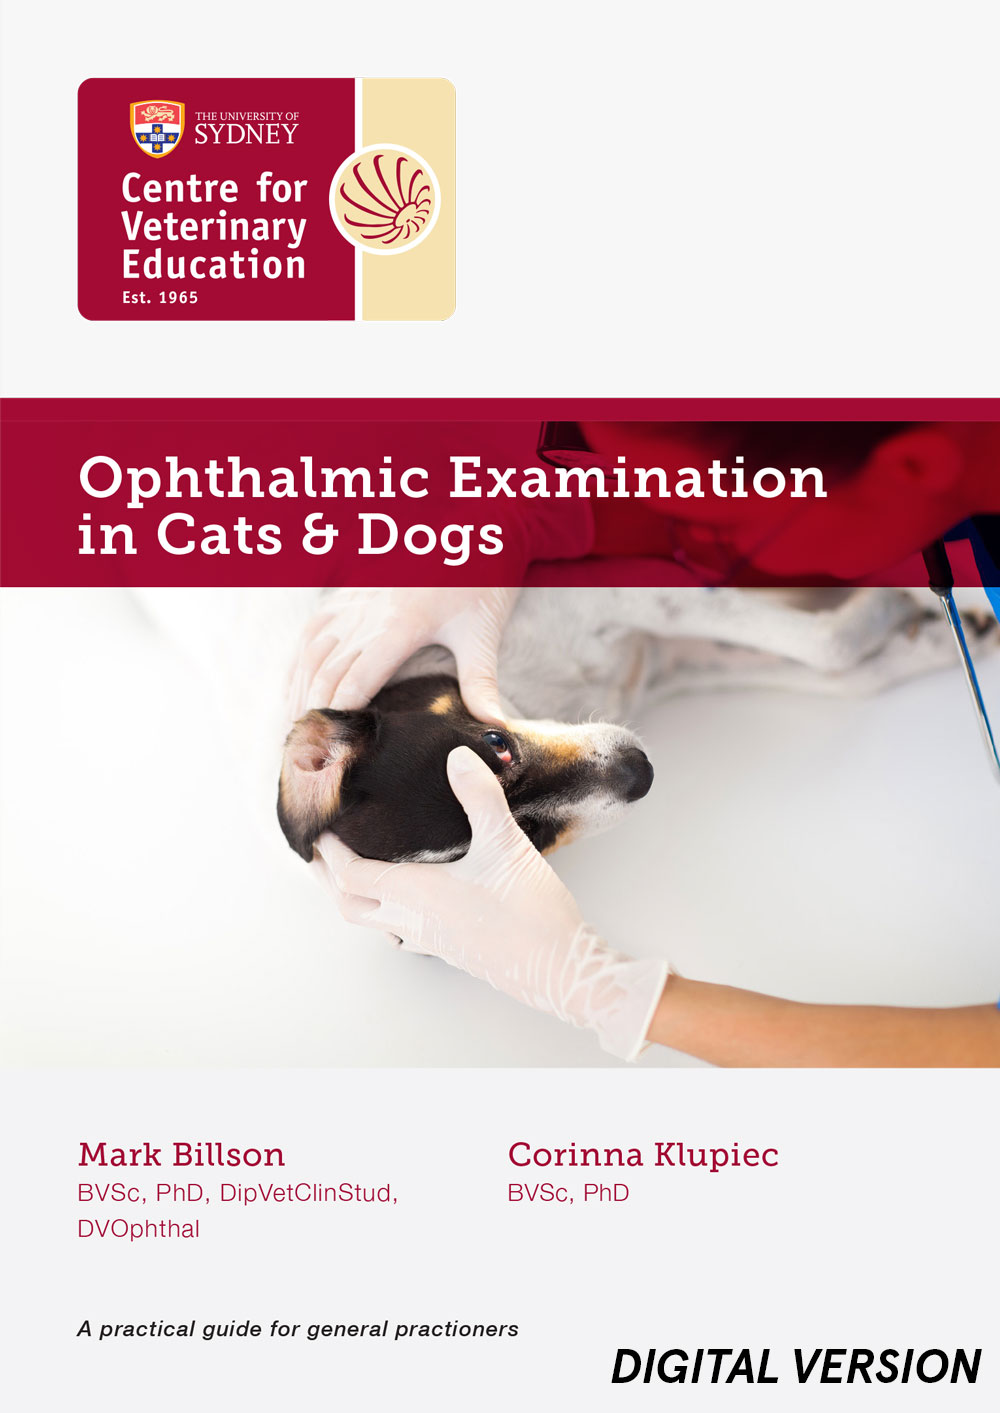 Ophthalmic Examination in Cats and Dogs (MP4)